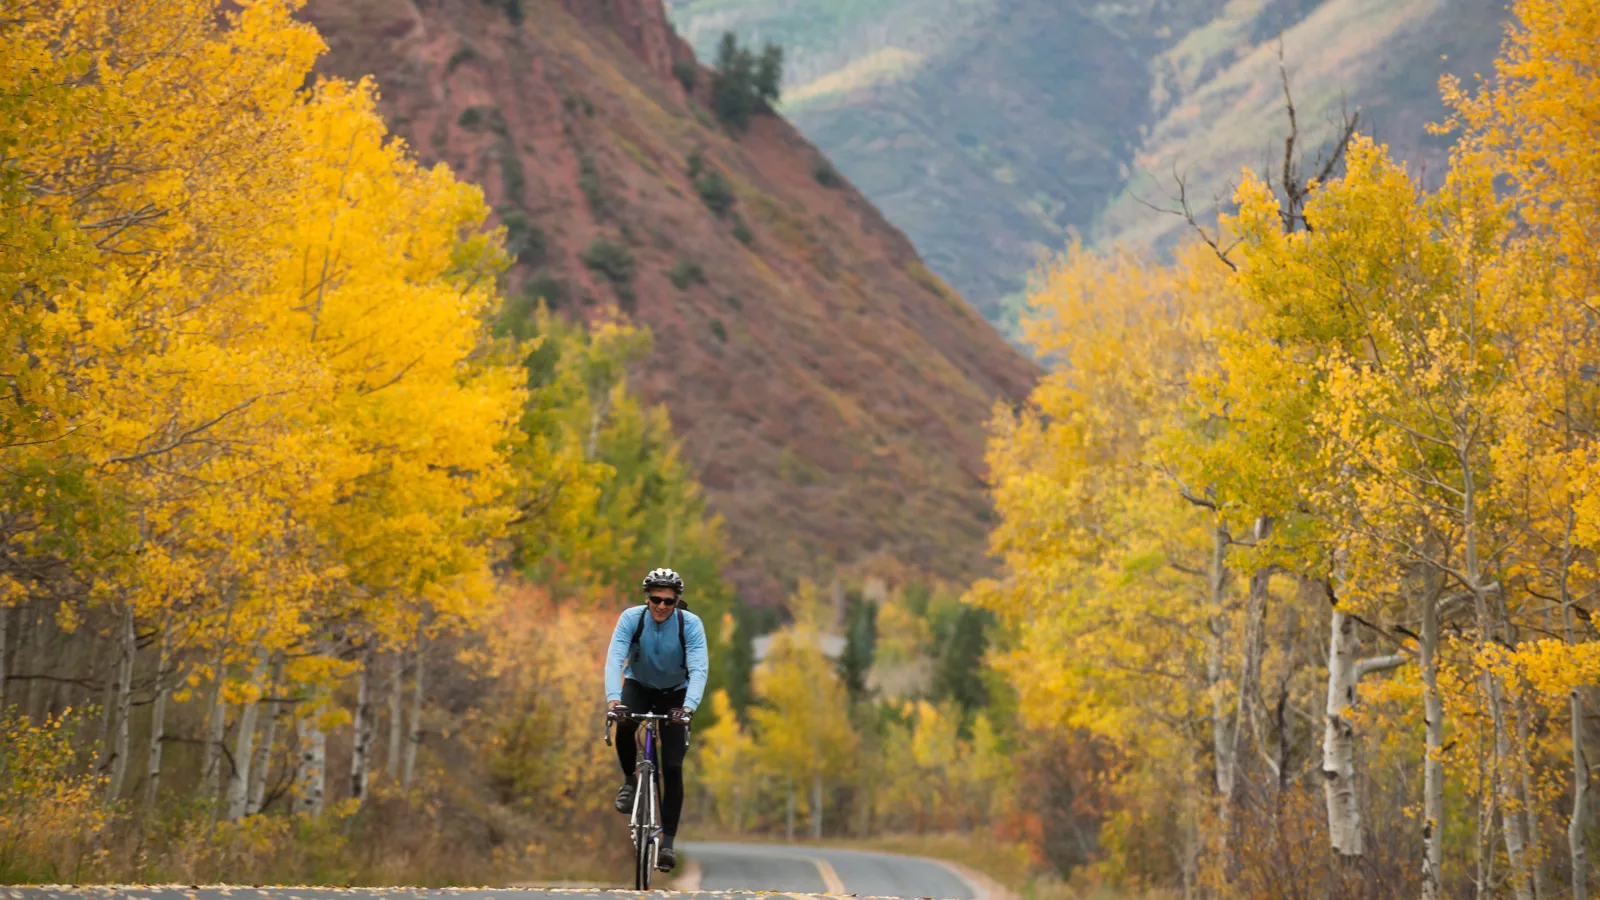 Aspen in October - Best 8 Things to Do in Aspen During Fall